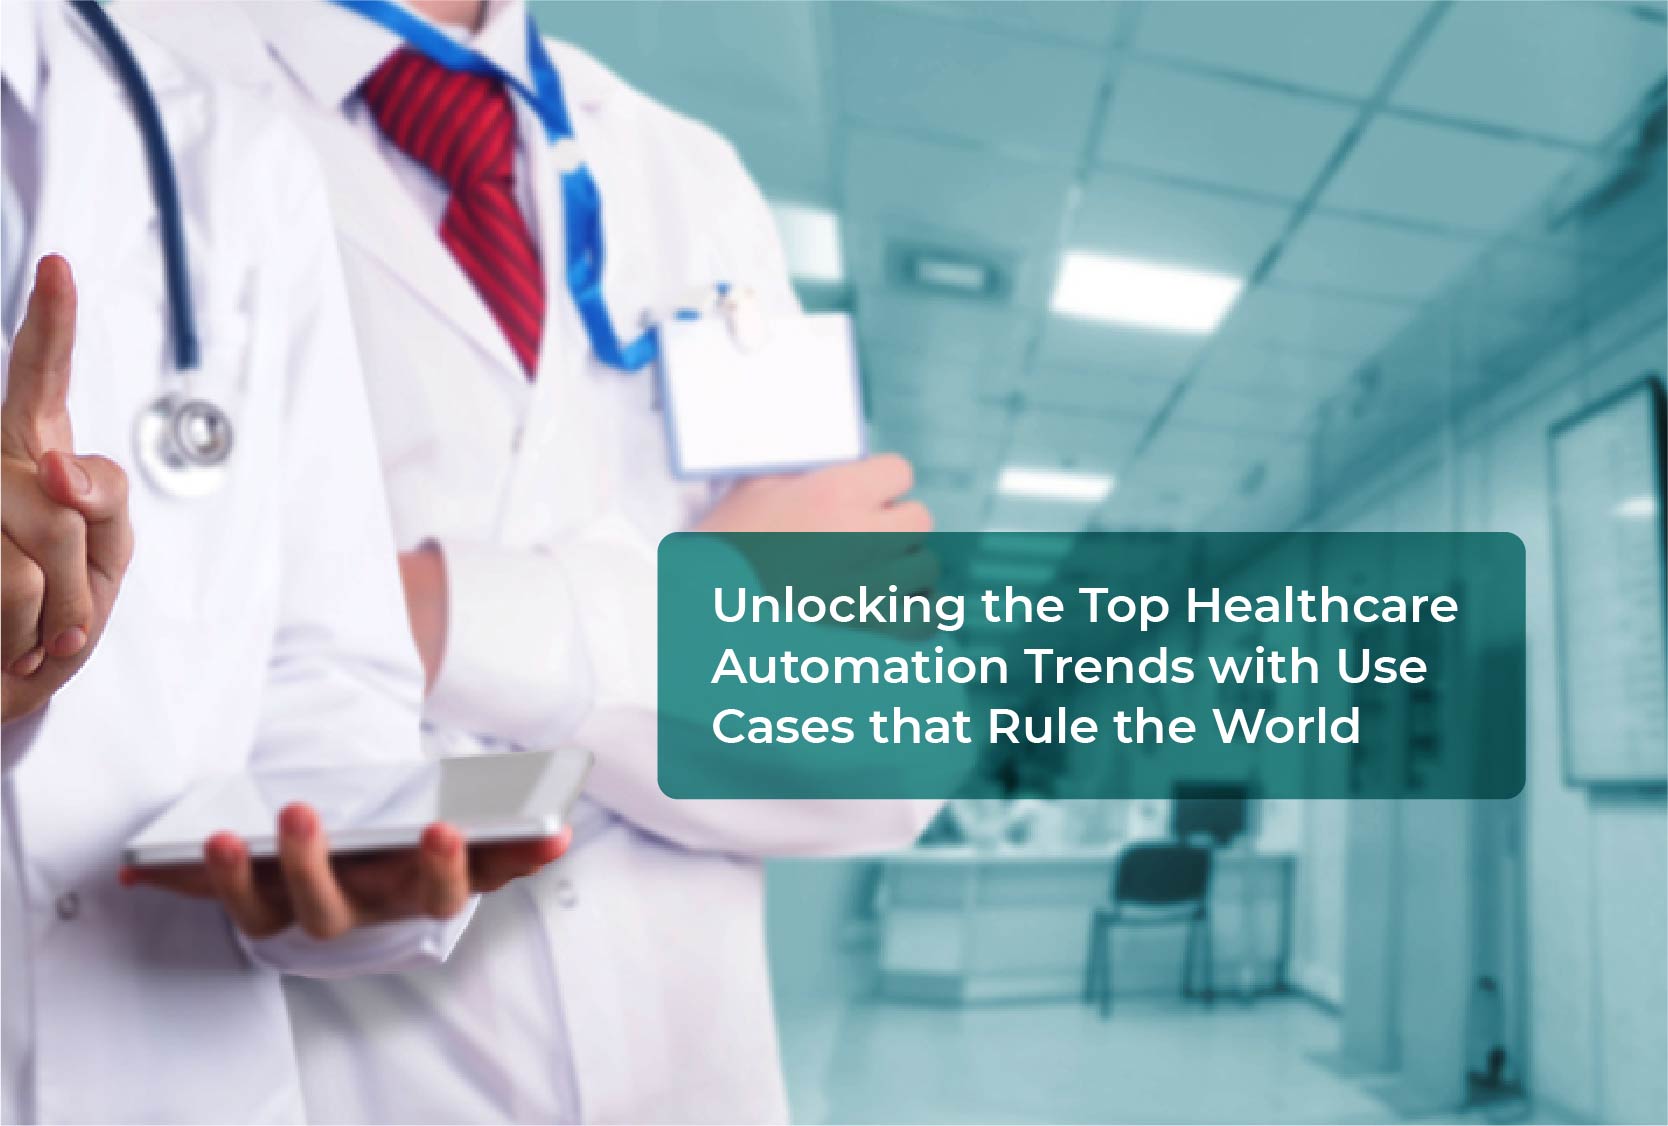 Unlocking the Top Healthcare Automation Trends with Use Cases that Rule the World